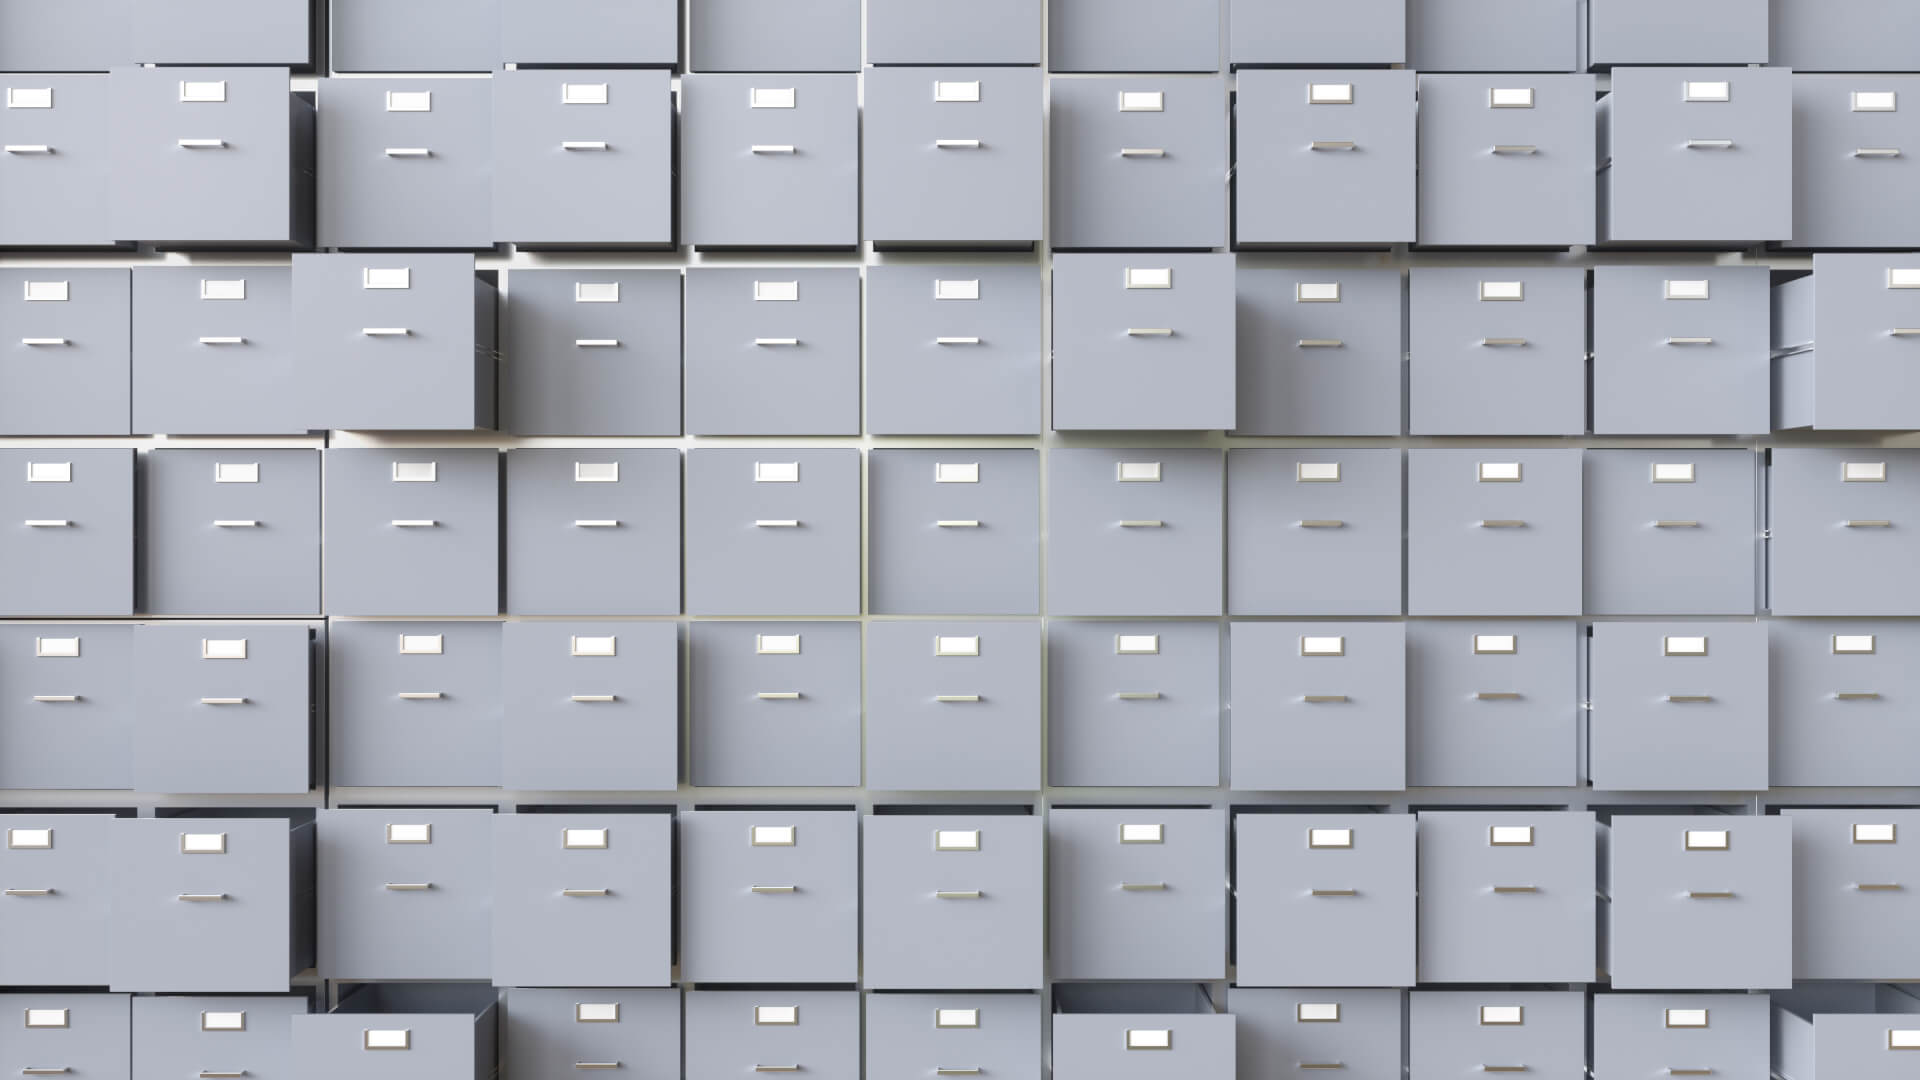 What to Keep in an Employee’s File and What Not to